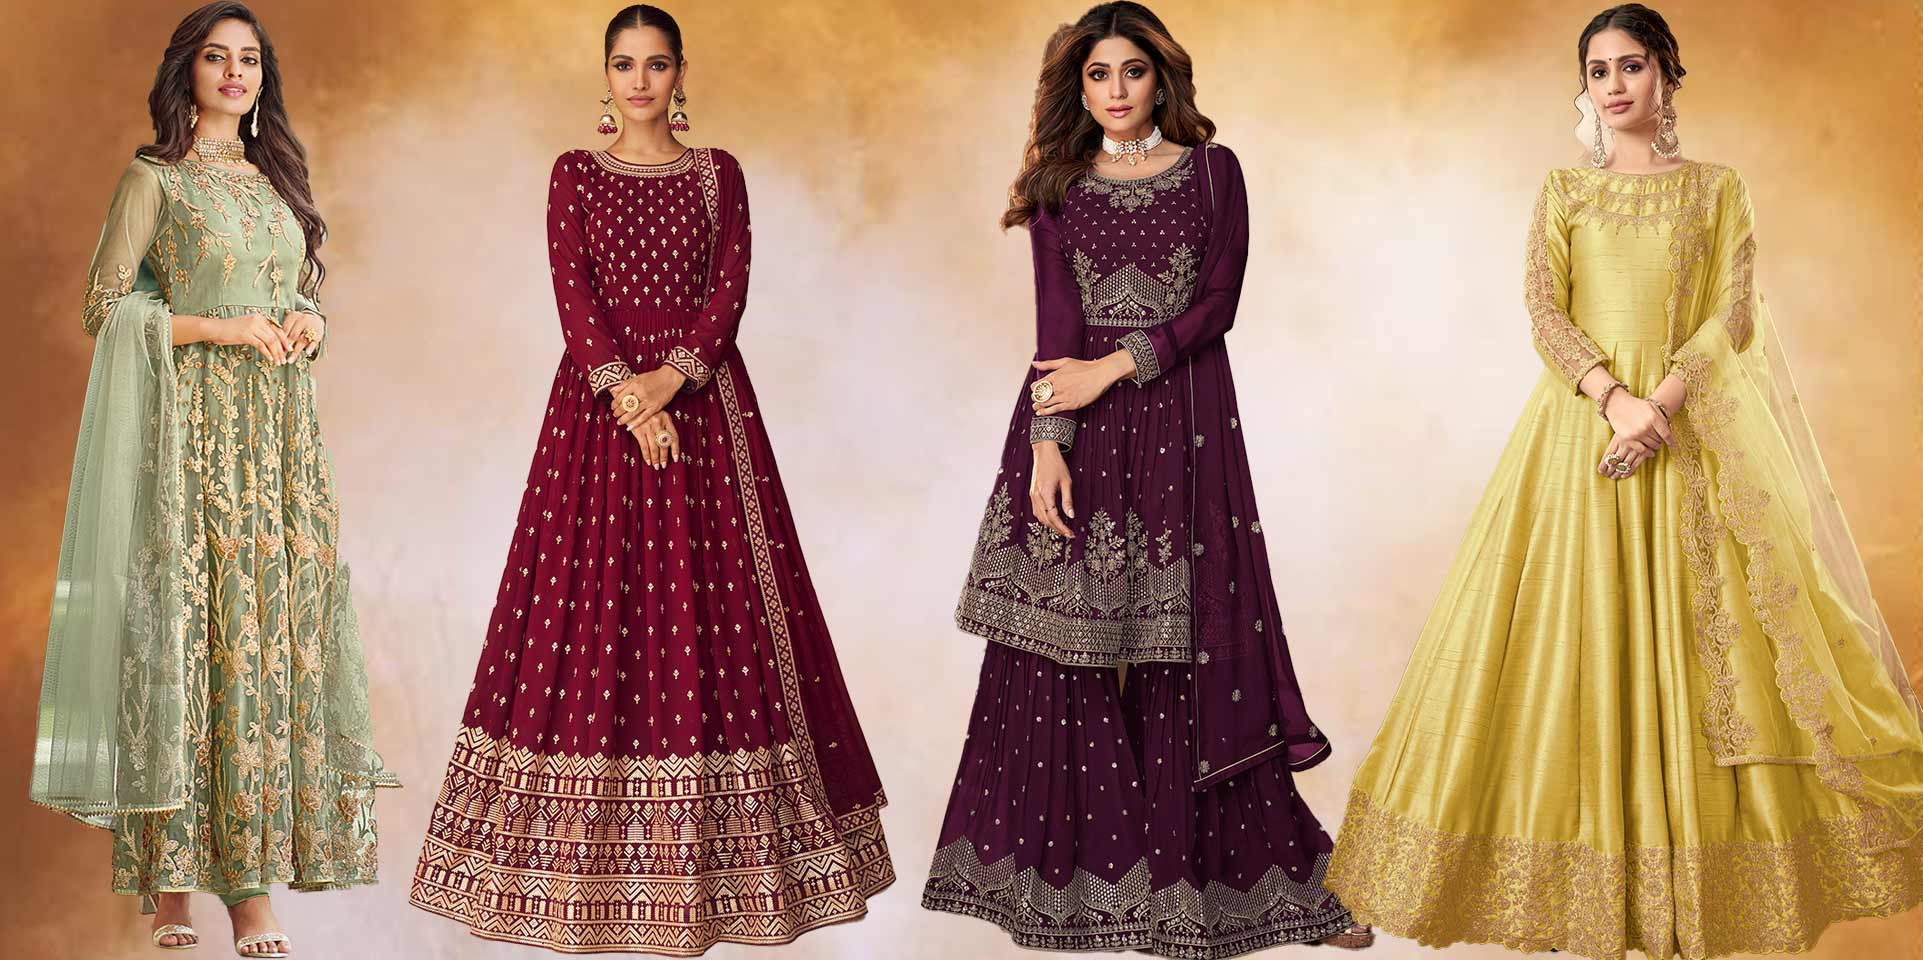 Indian Gown Styles: Different Types Of Indian Gown Designs